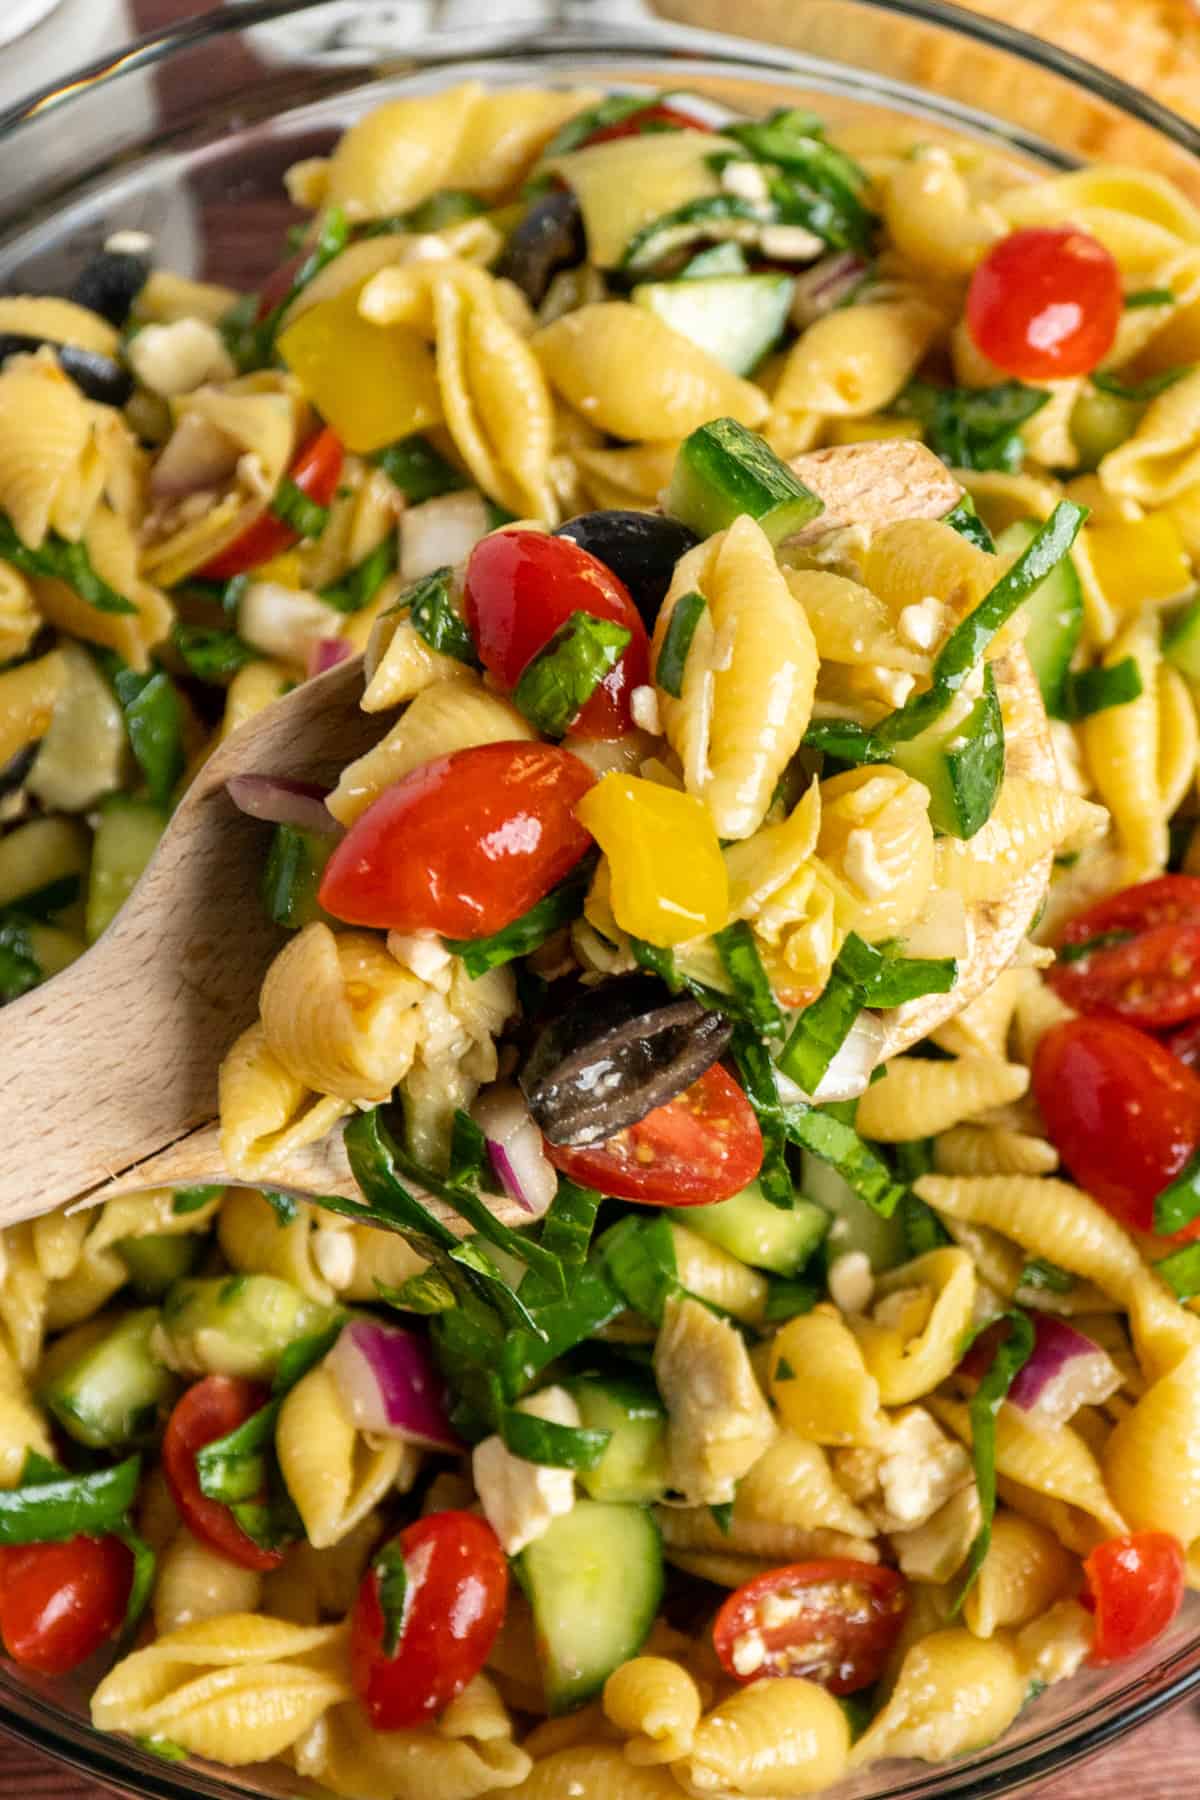 A wooden spoon holding pasta salad.